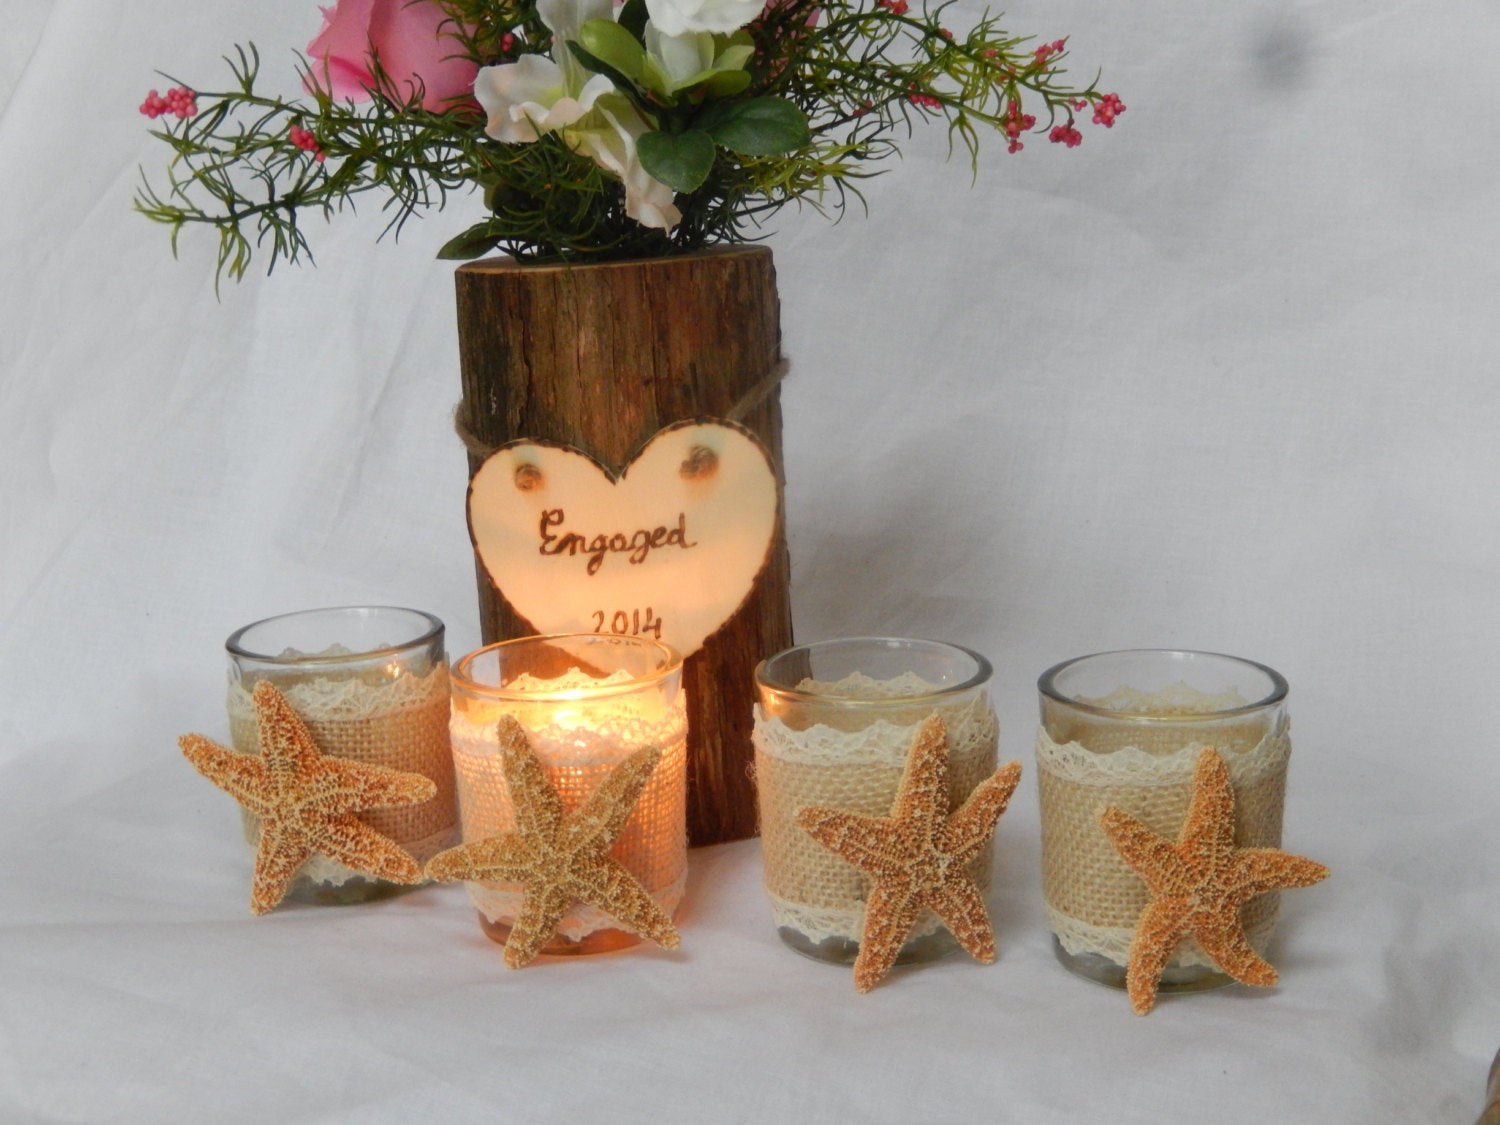 Beach Themed Engagement Party Ideas
 Engagement Party Decor Beach Themed Candles 4 by JCBees on